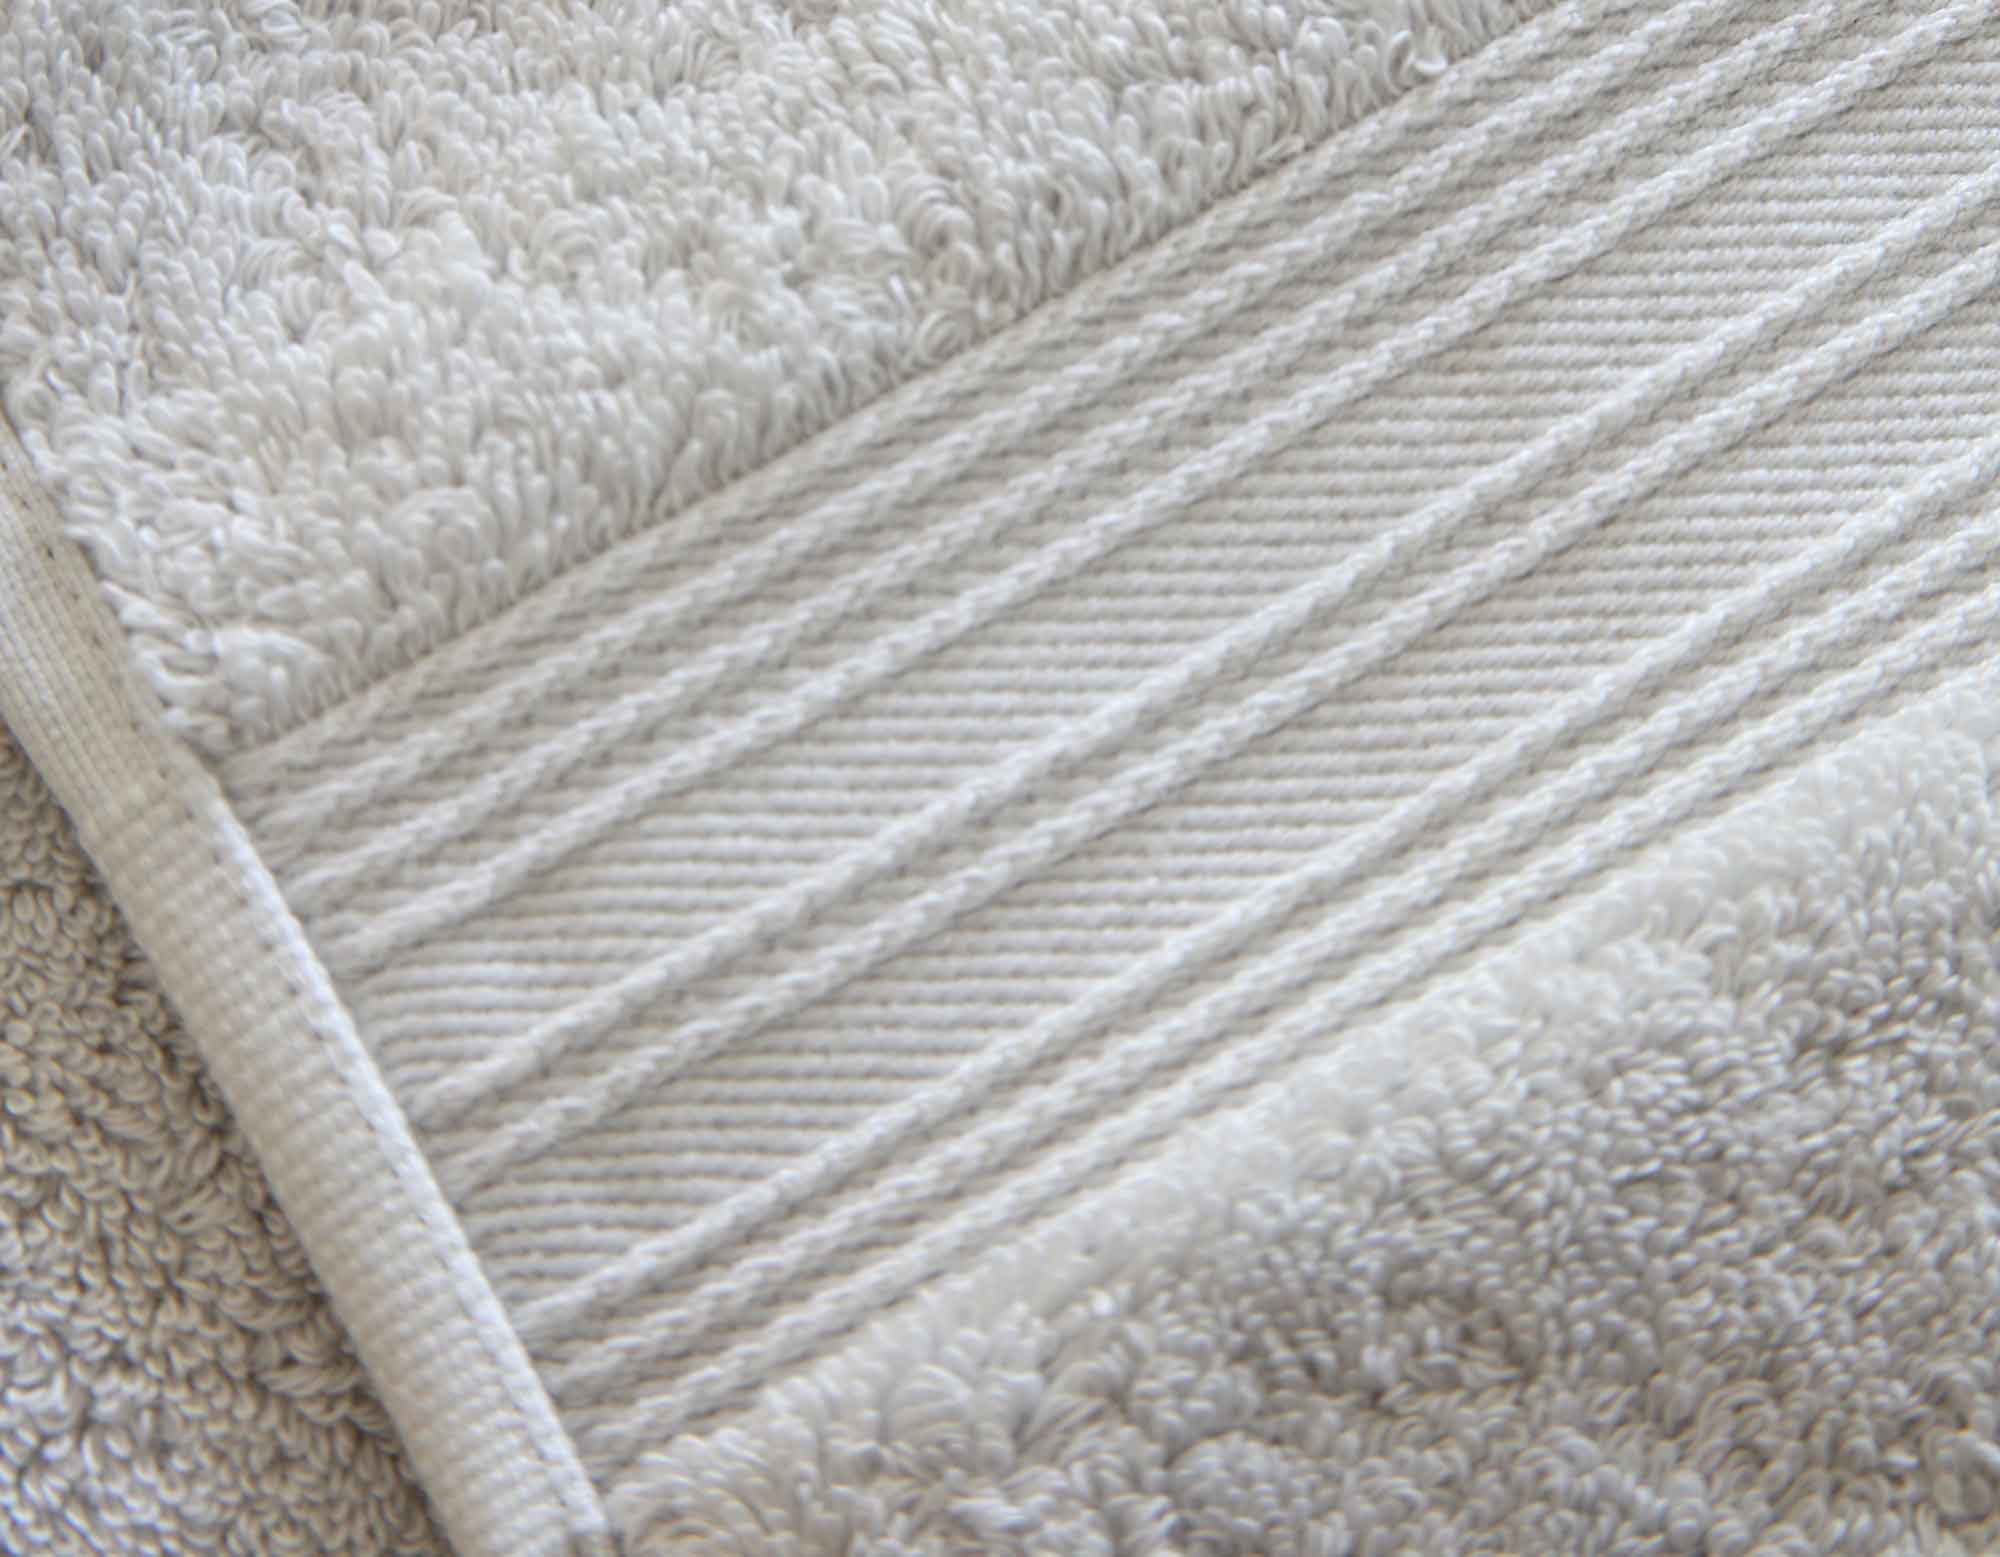 Pearl grey bath towel close-up showing hem and cotton loop details